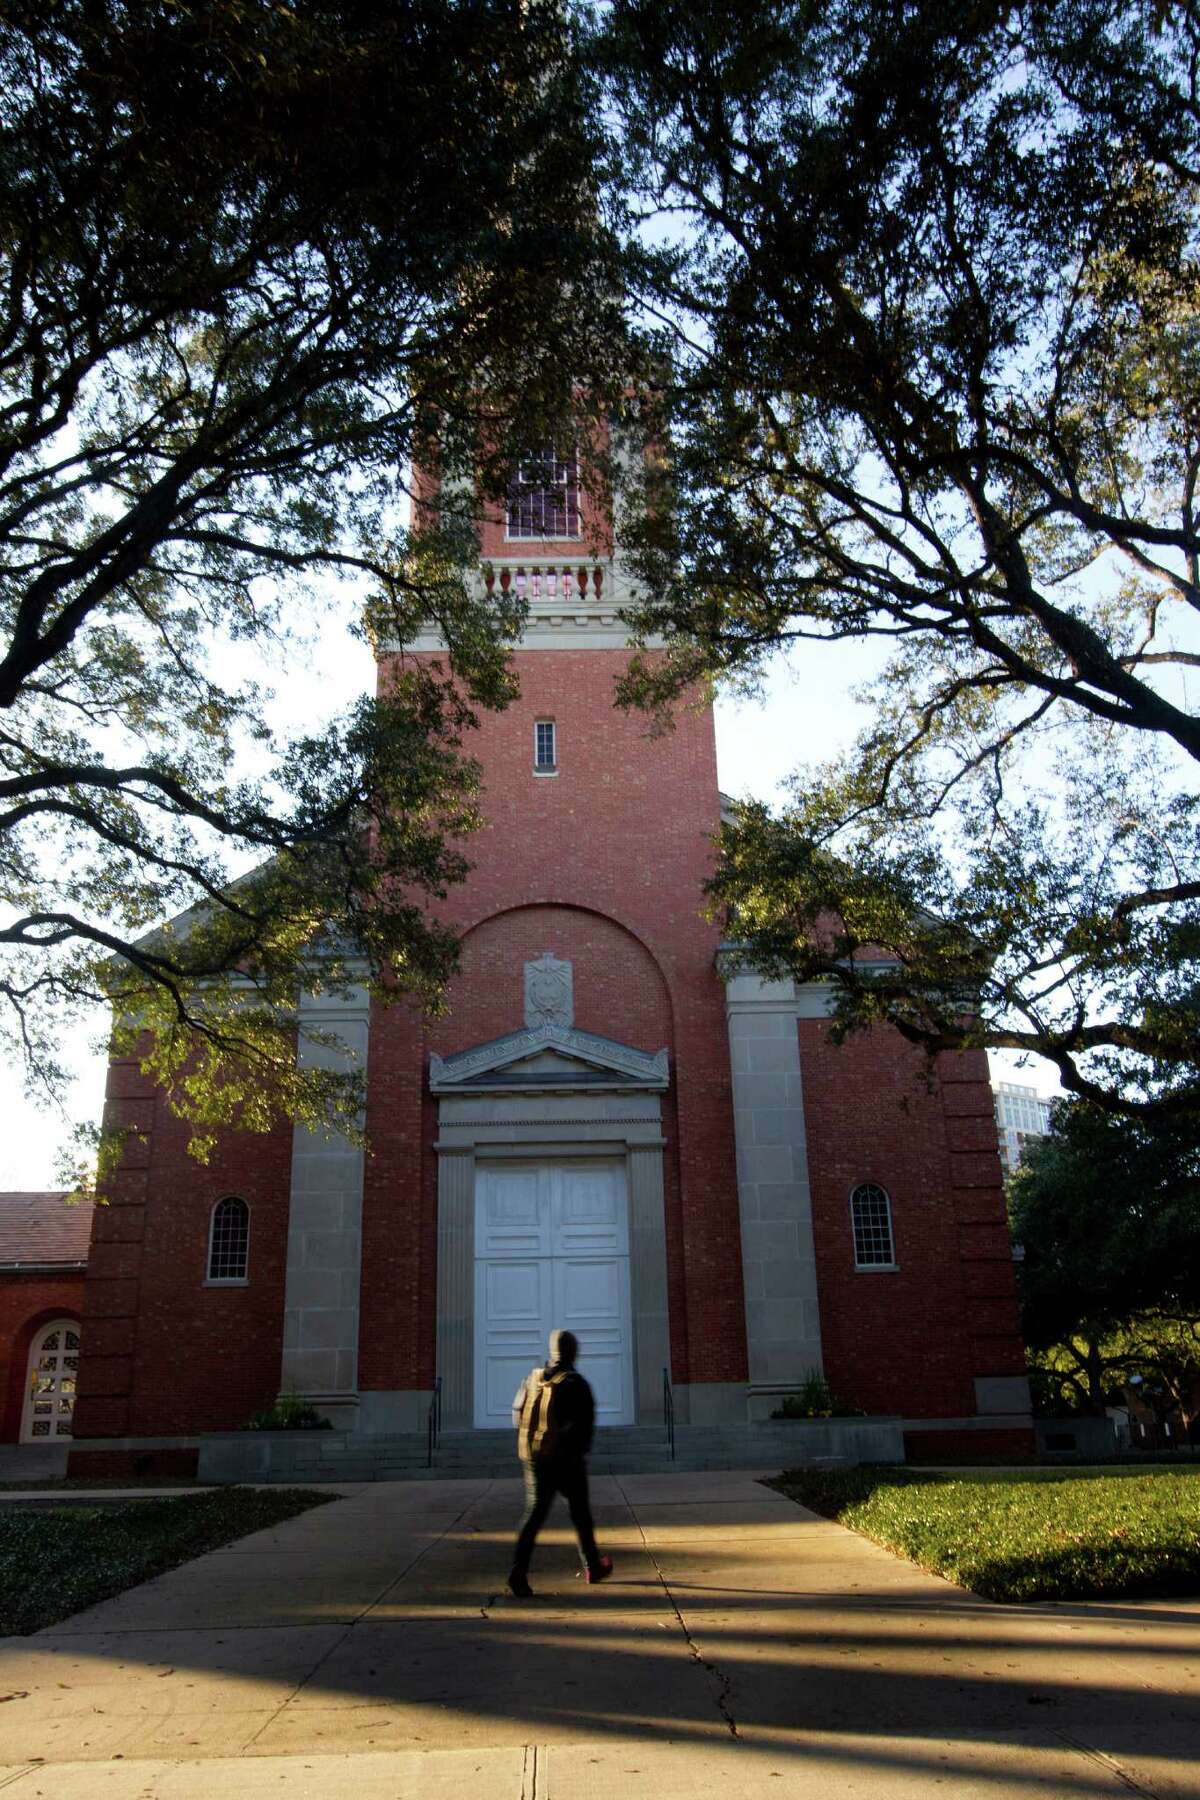 First Presbyterian Church, founded in 1839 as one of the oldest churches in the city, is preparing a vote on whether to split from the national, more liberal, body.